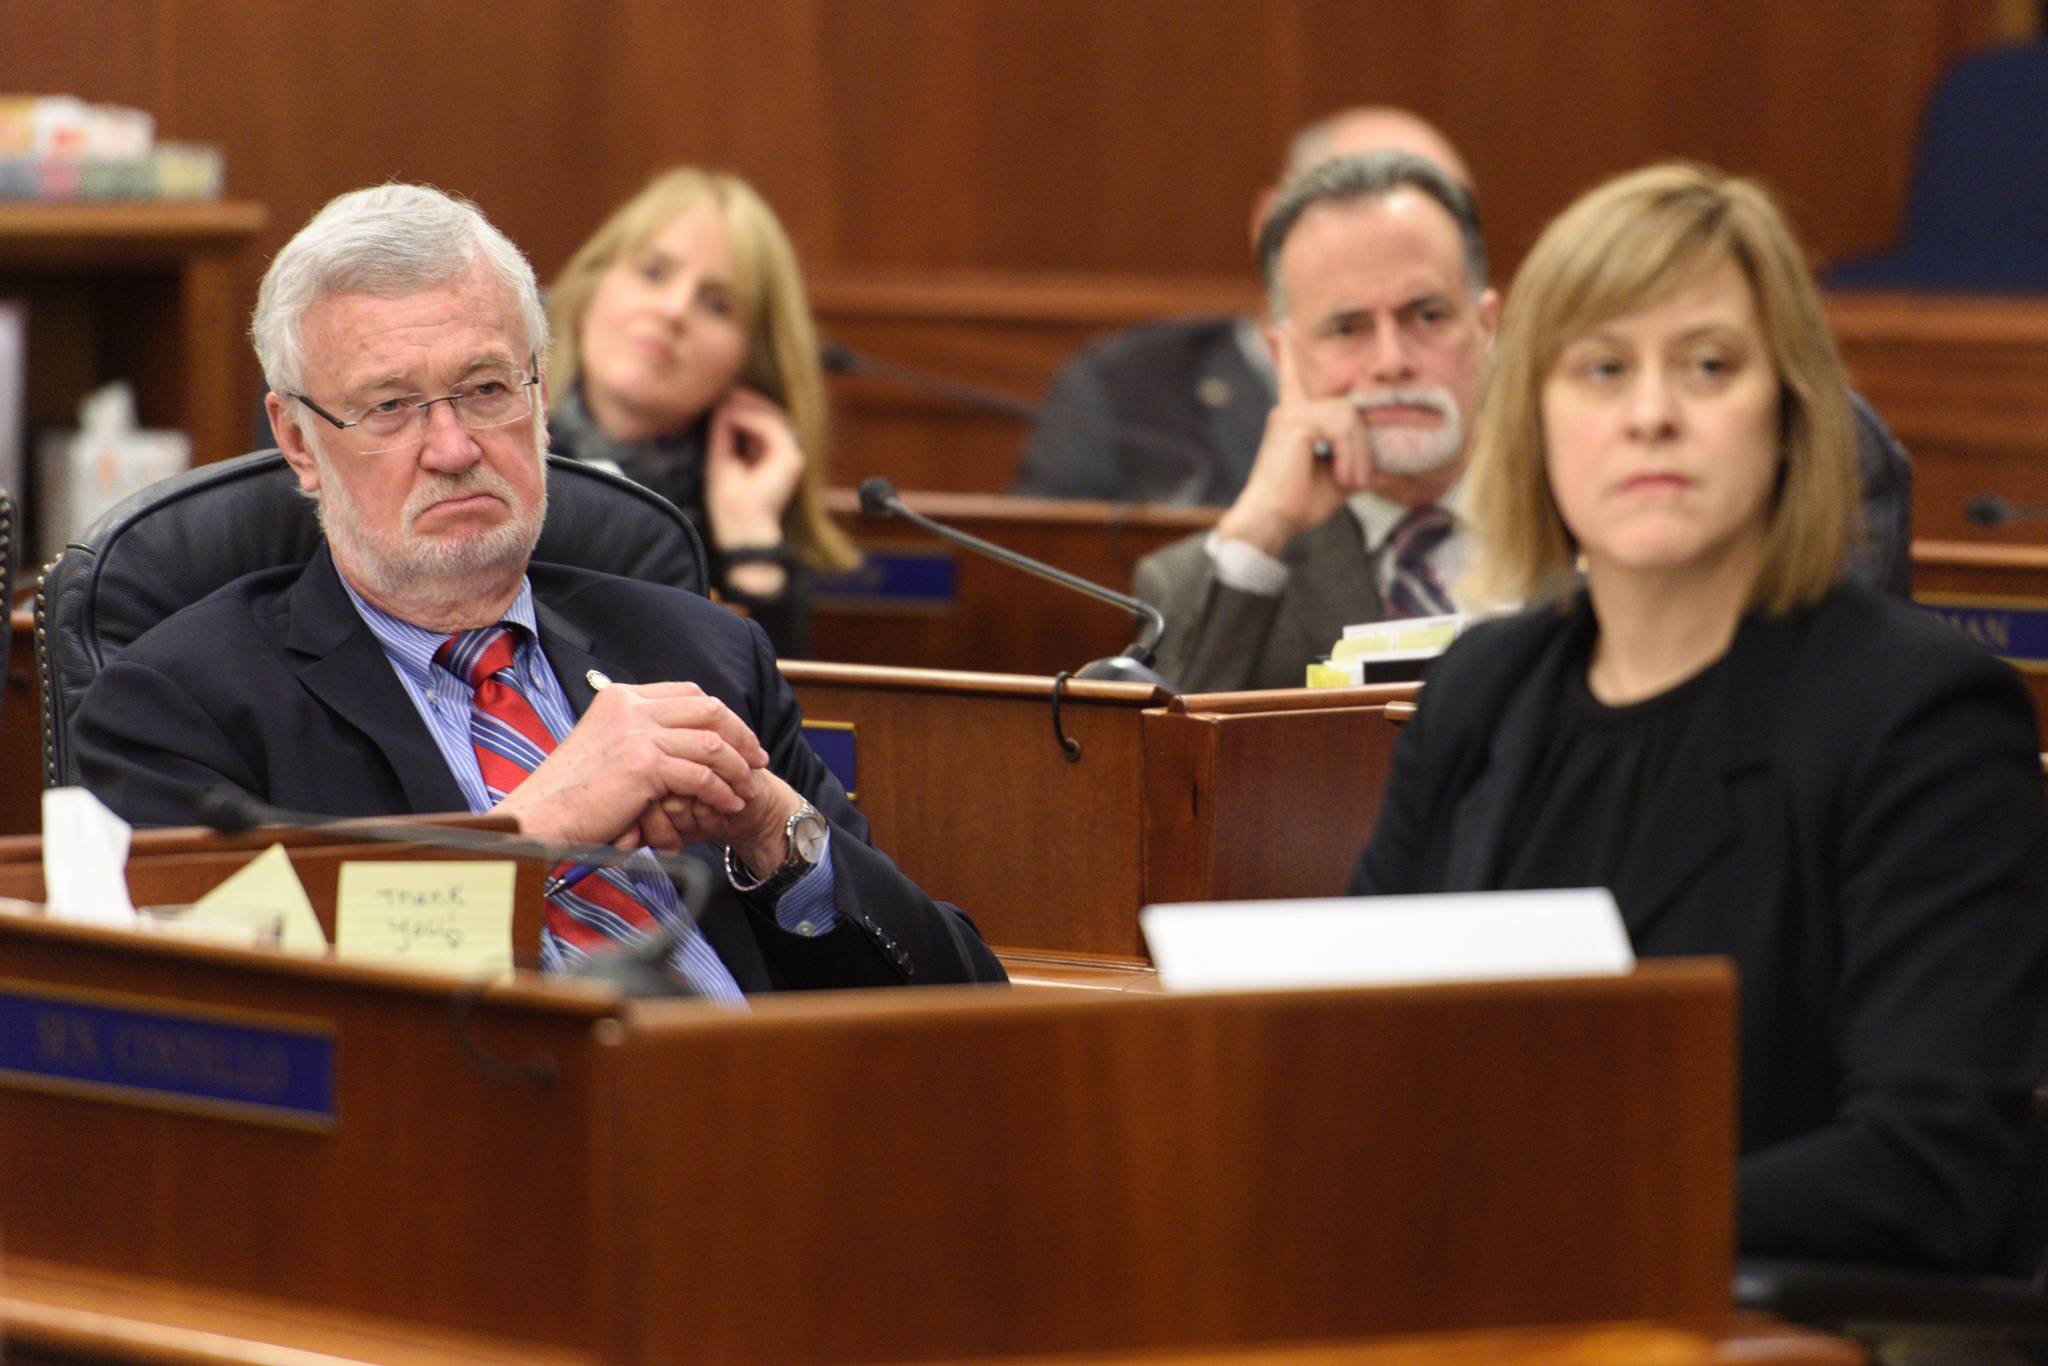 Senators listen to debate on whether to pay a full dividend during debate on the size of the Alaska Permanent Fund Dividend in the Alaska Senate on Tuesday, June 4, 2019. (Michael Penn | Juneau Empire)